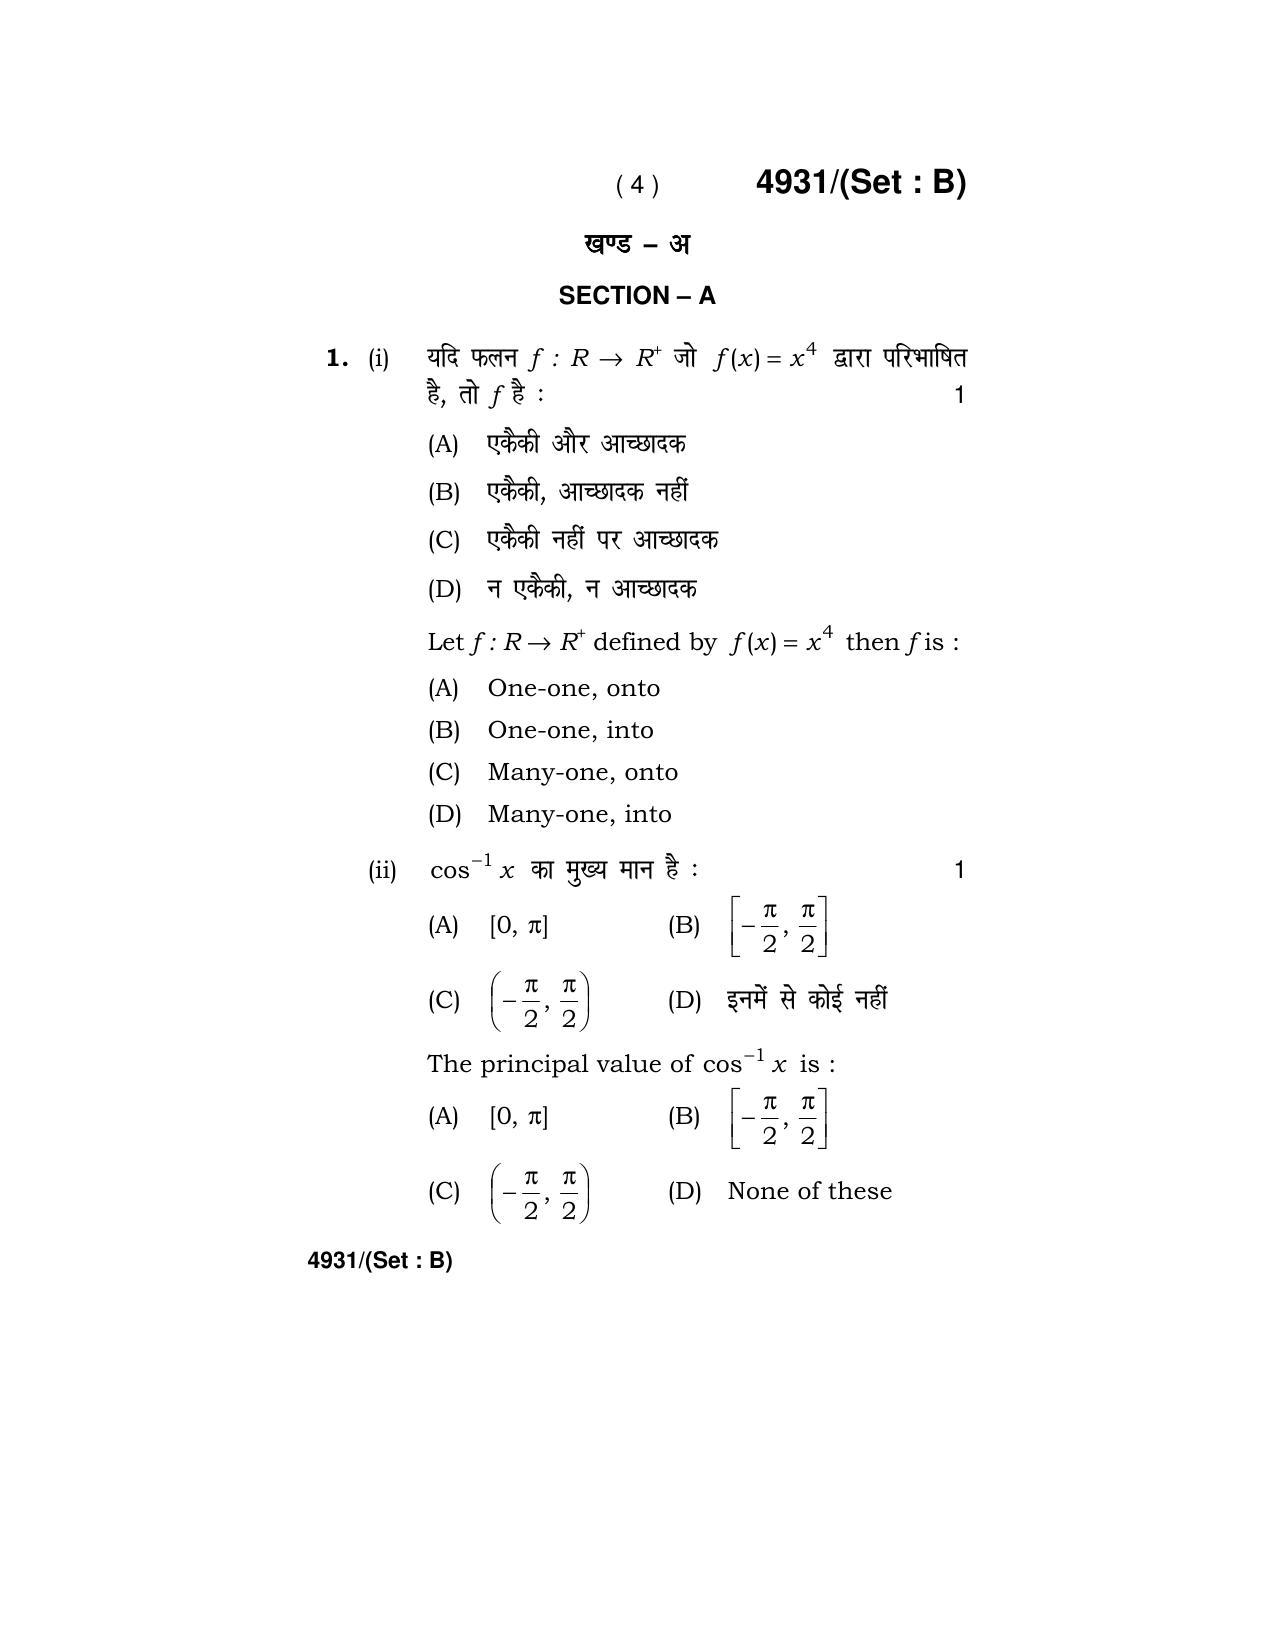 Haryana Board HBSE Class 12 Mathematics 2020 Question Paper - Page 20